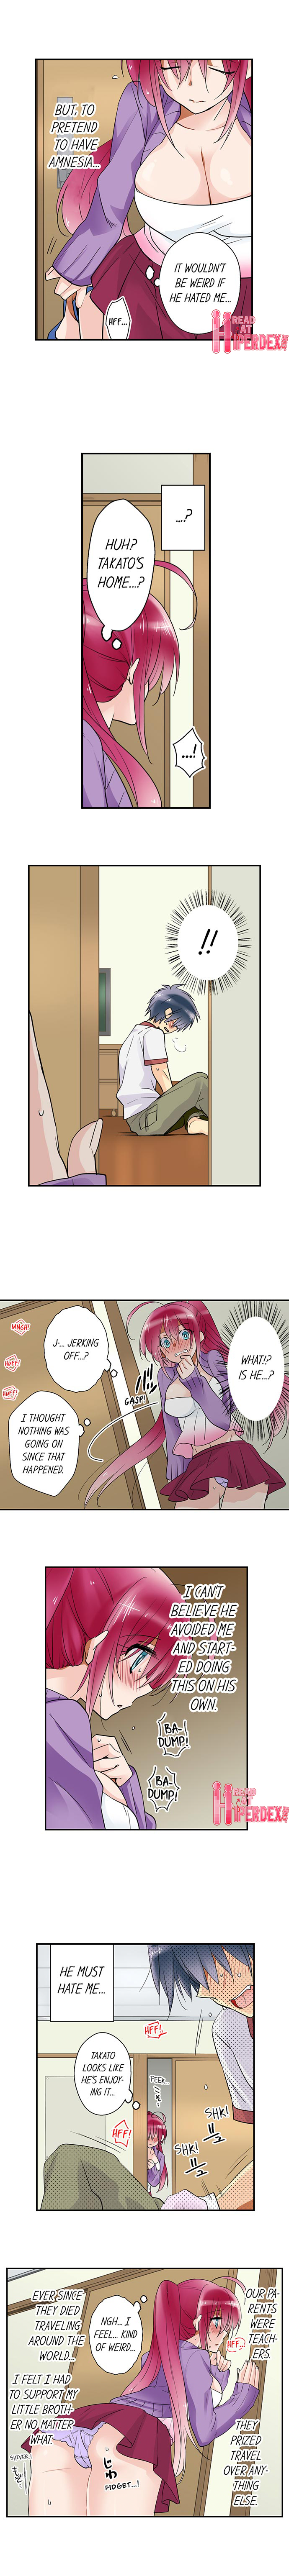 Teaching Sex to My Amnesiac Sister - Chapter 7 Page 4